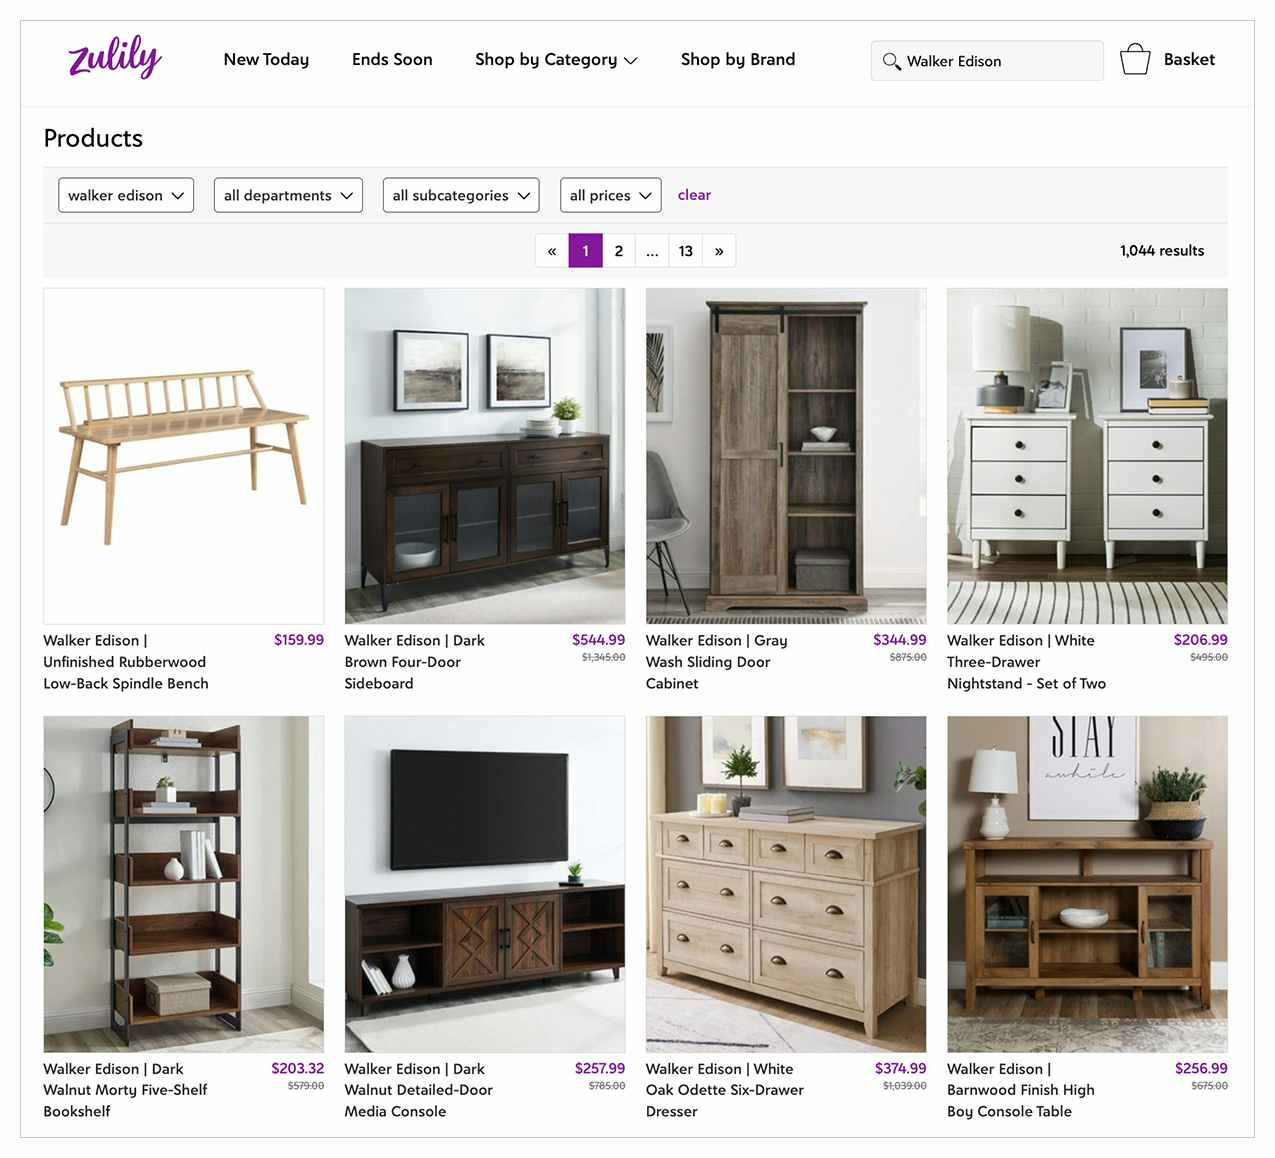 zulily screenshot of walker edison furniture products search results